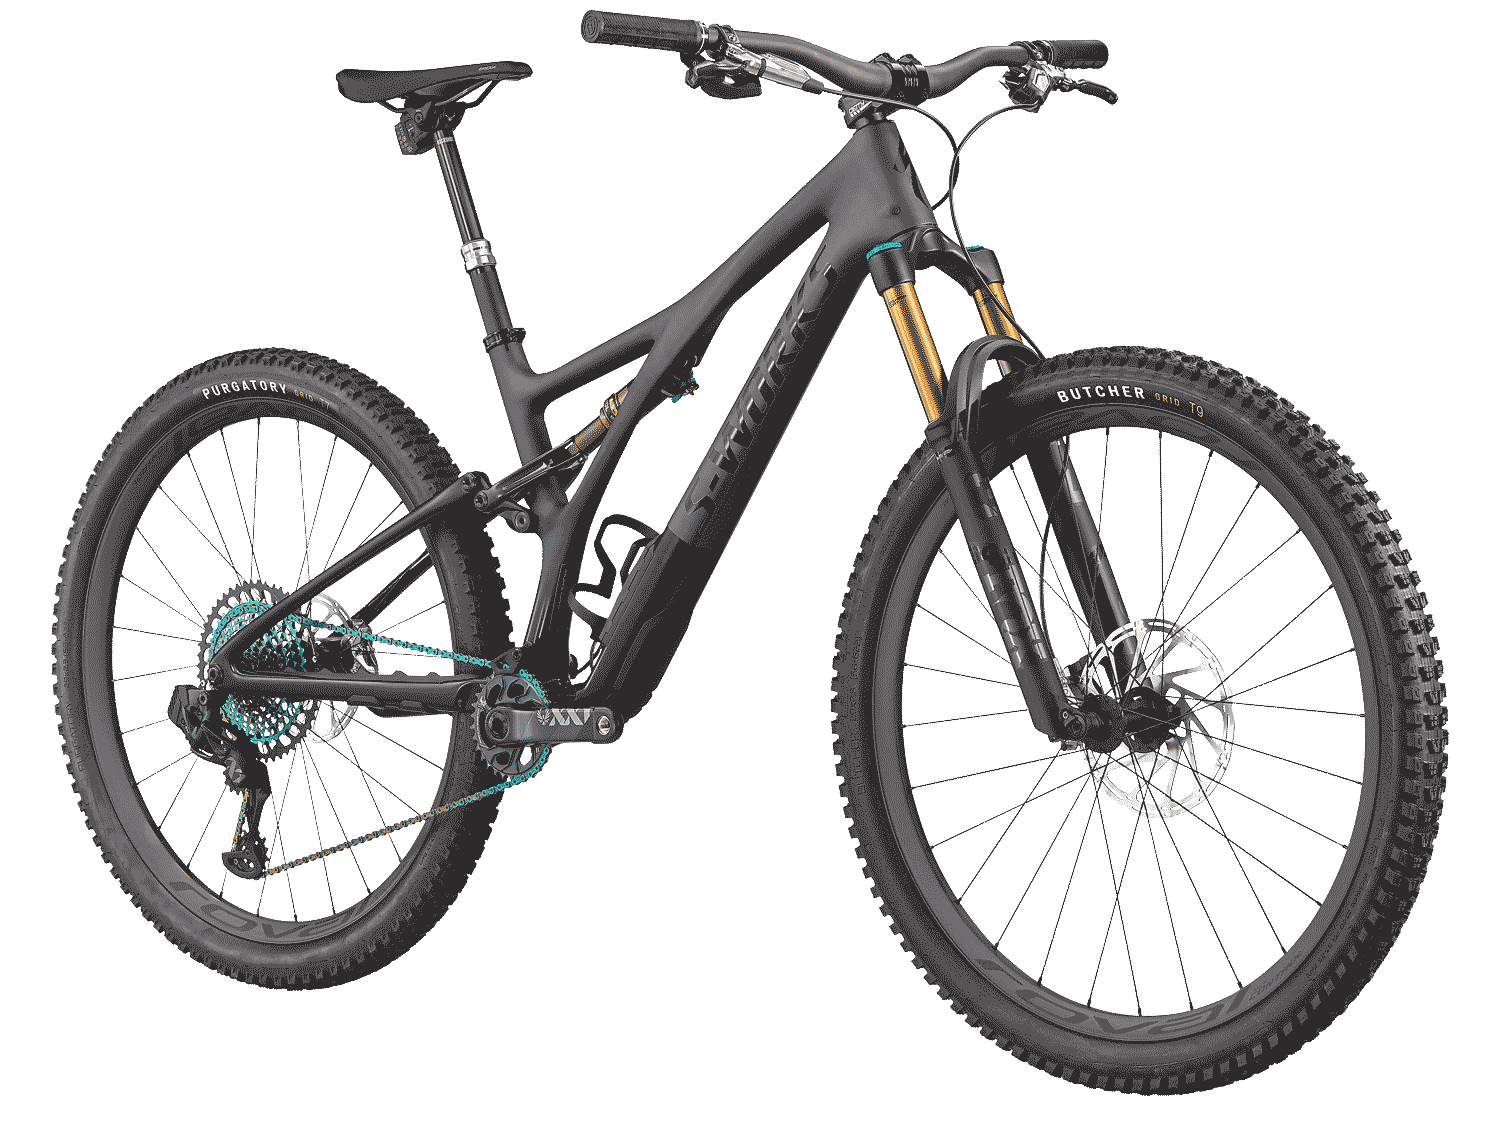 The Specialized Stumpjumper